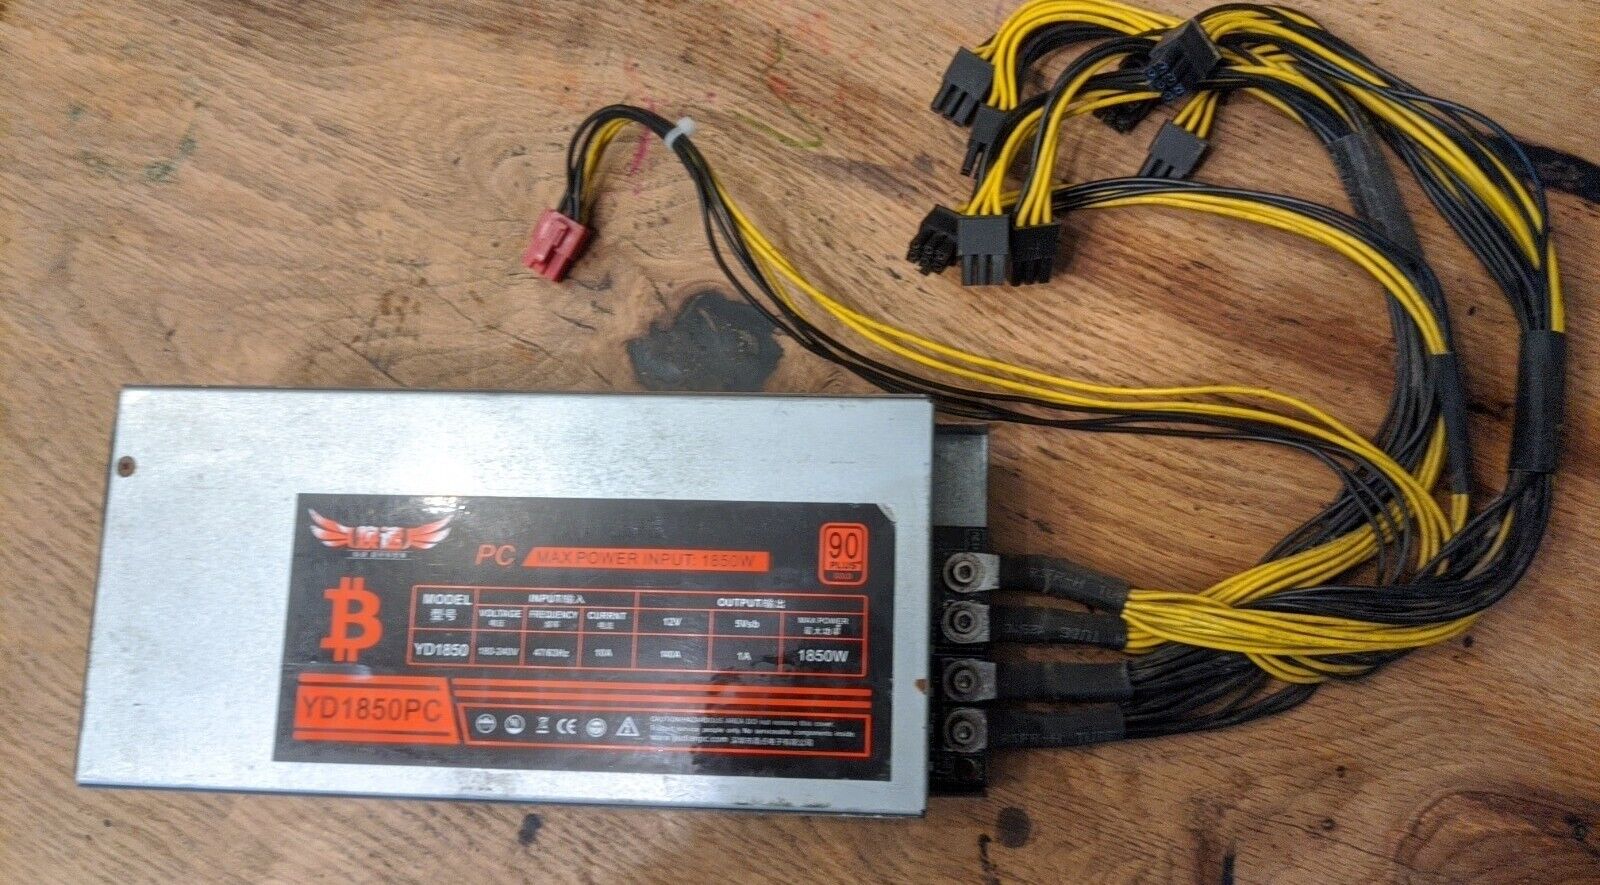 1850w YD1850PC Power Supply - Cryptocurrency Mining  - 90 plus gold